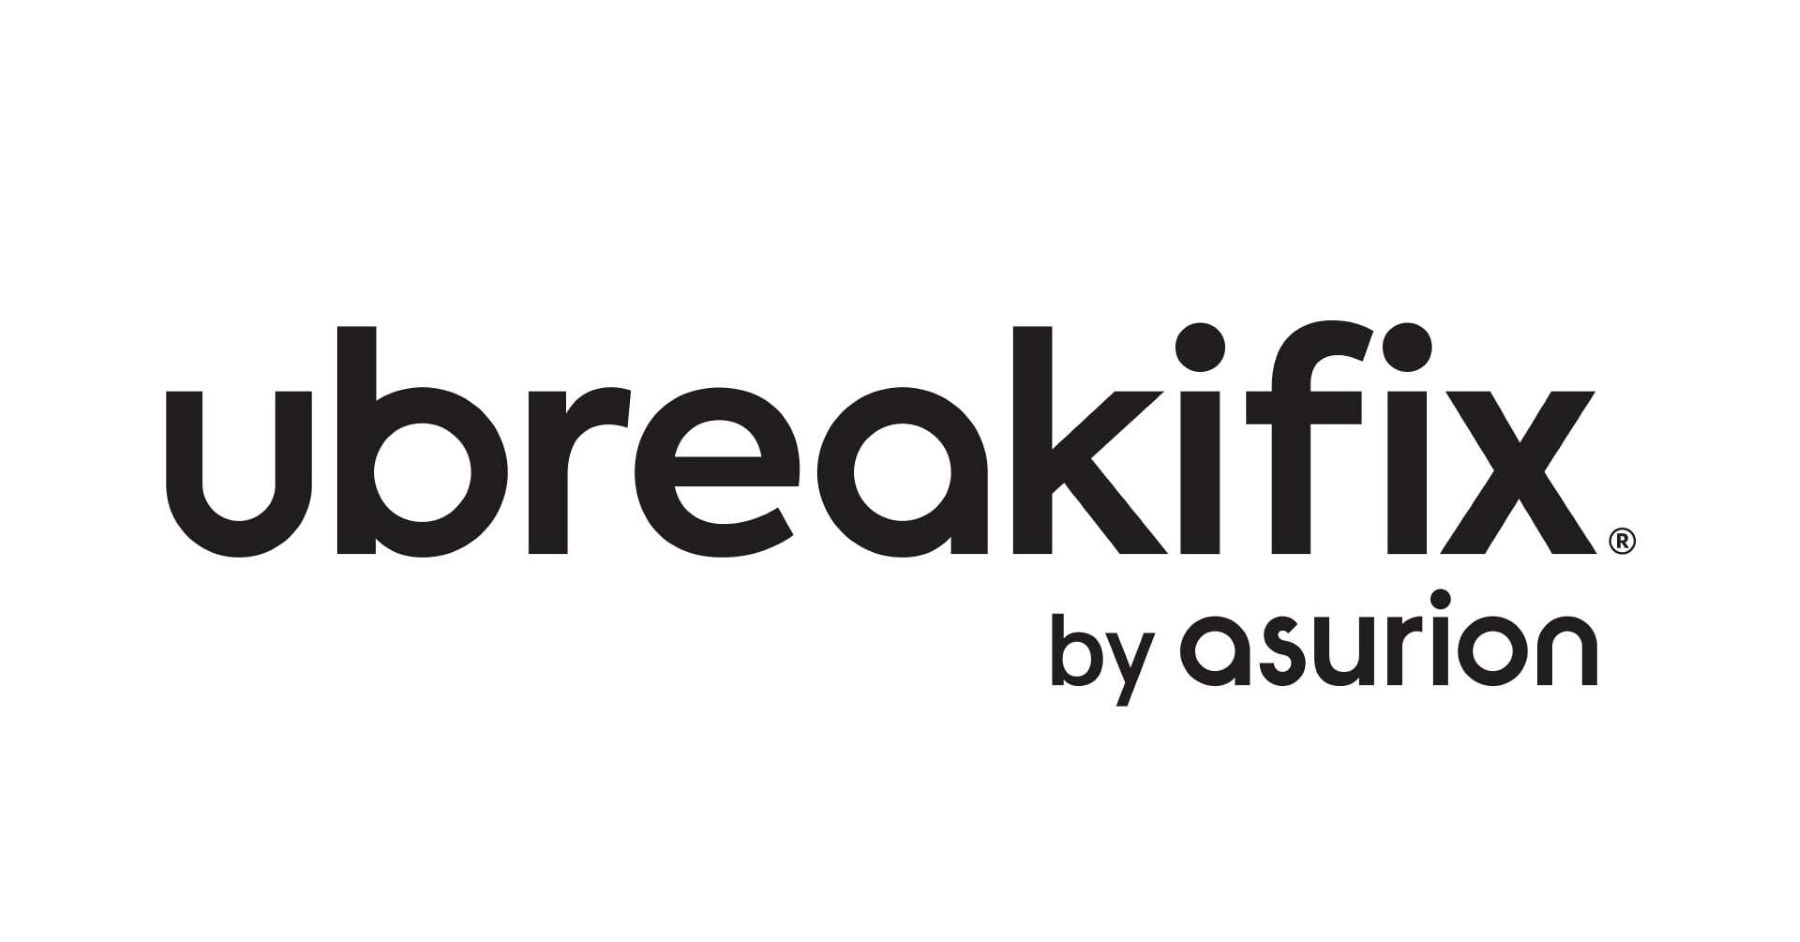 Samsung and uBreakiFix by Asurion Team Up to Bring Enhanced Device Care to Even More People Nationwide